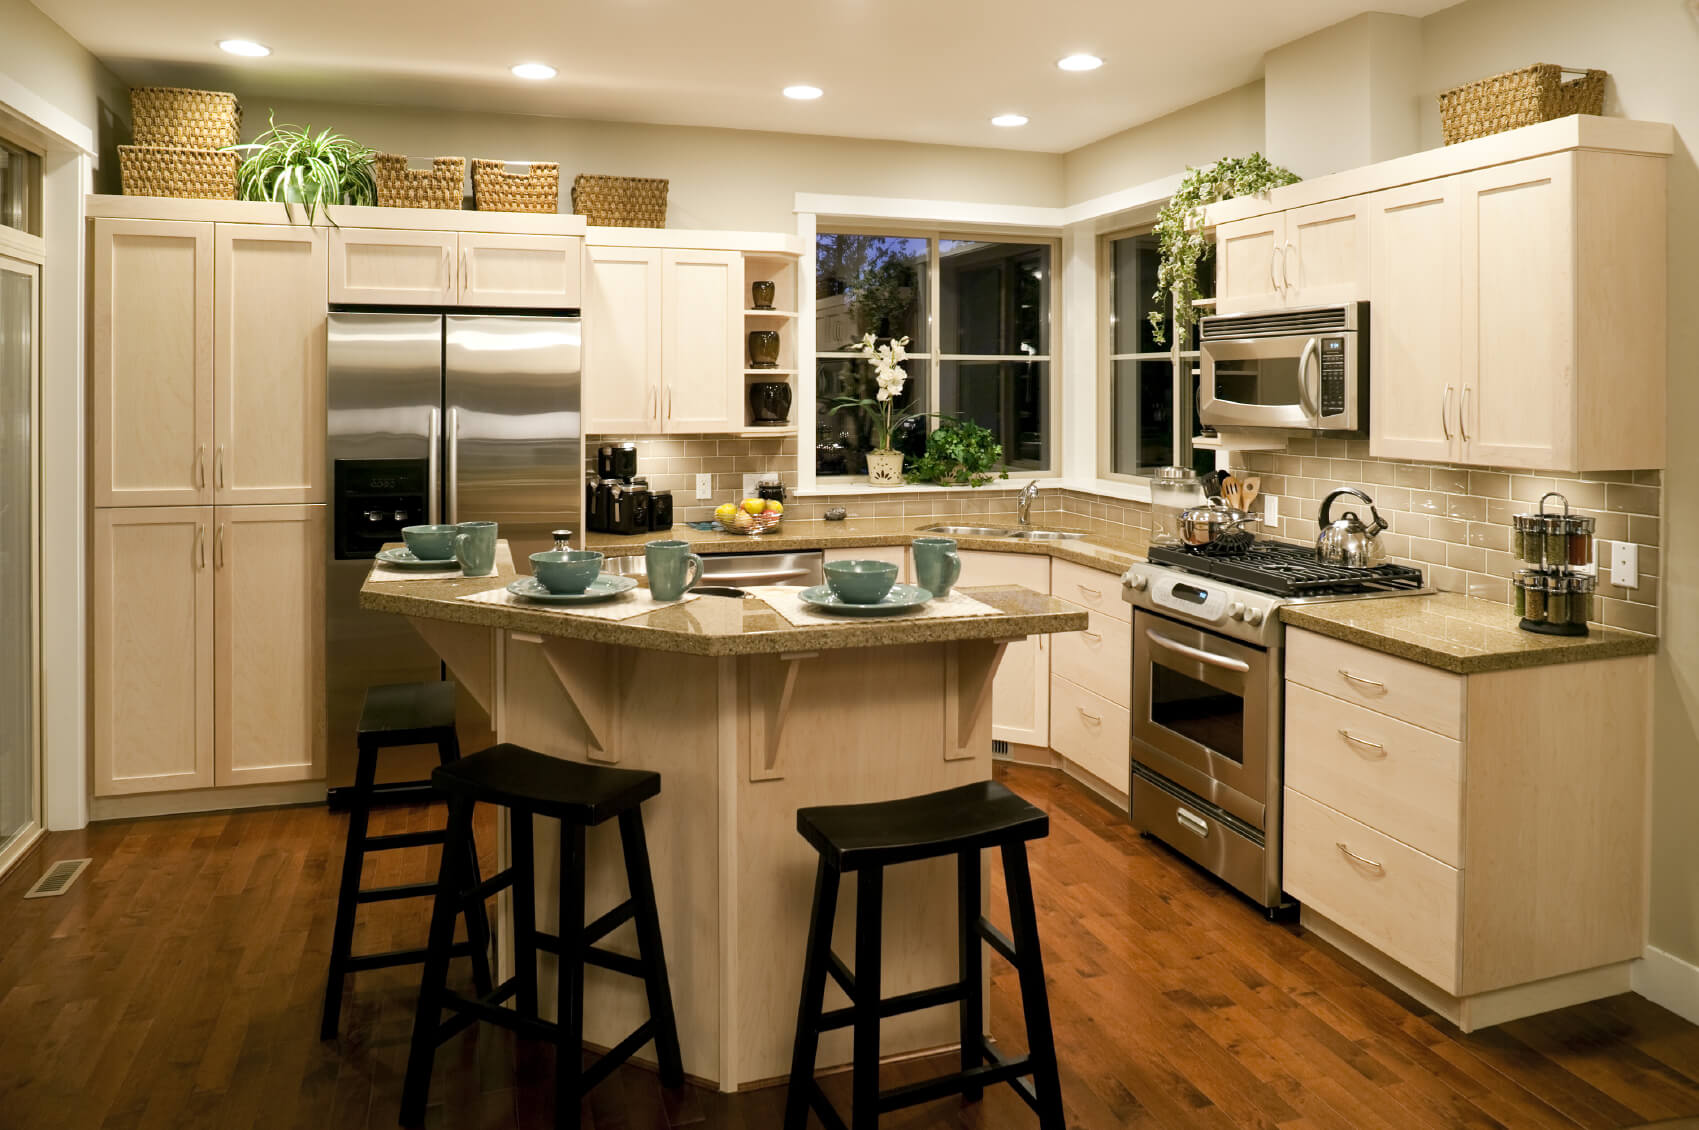 124 Great Kitchen Design And Ideas With Cabinets Islands